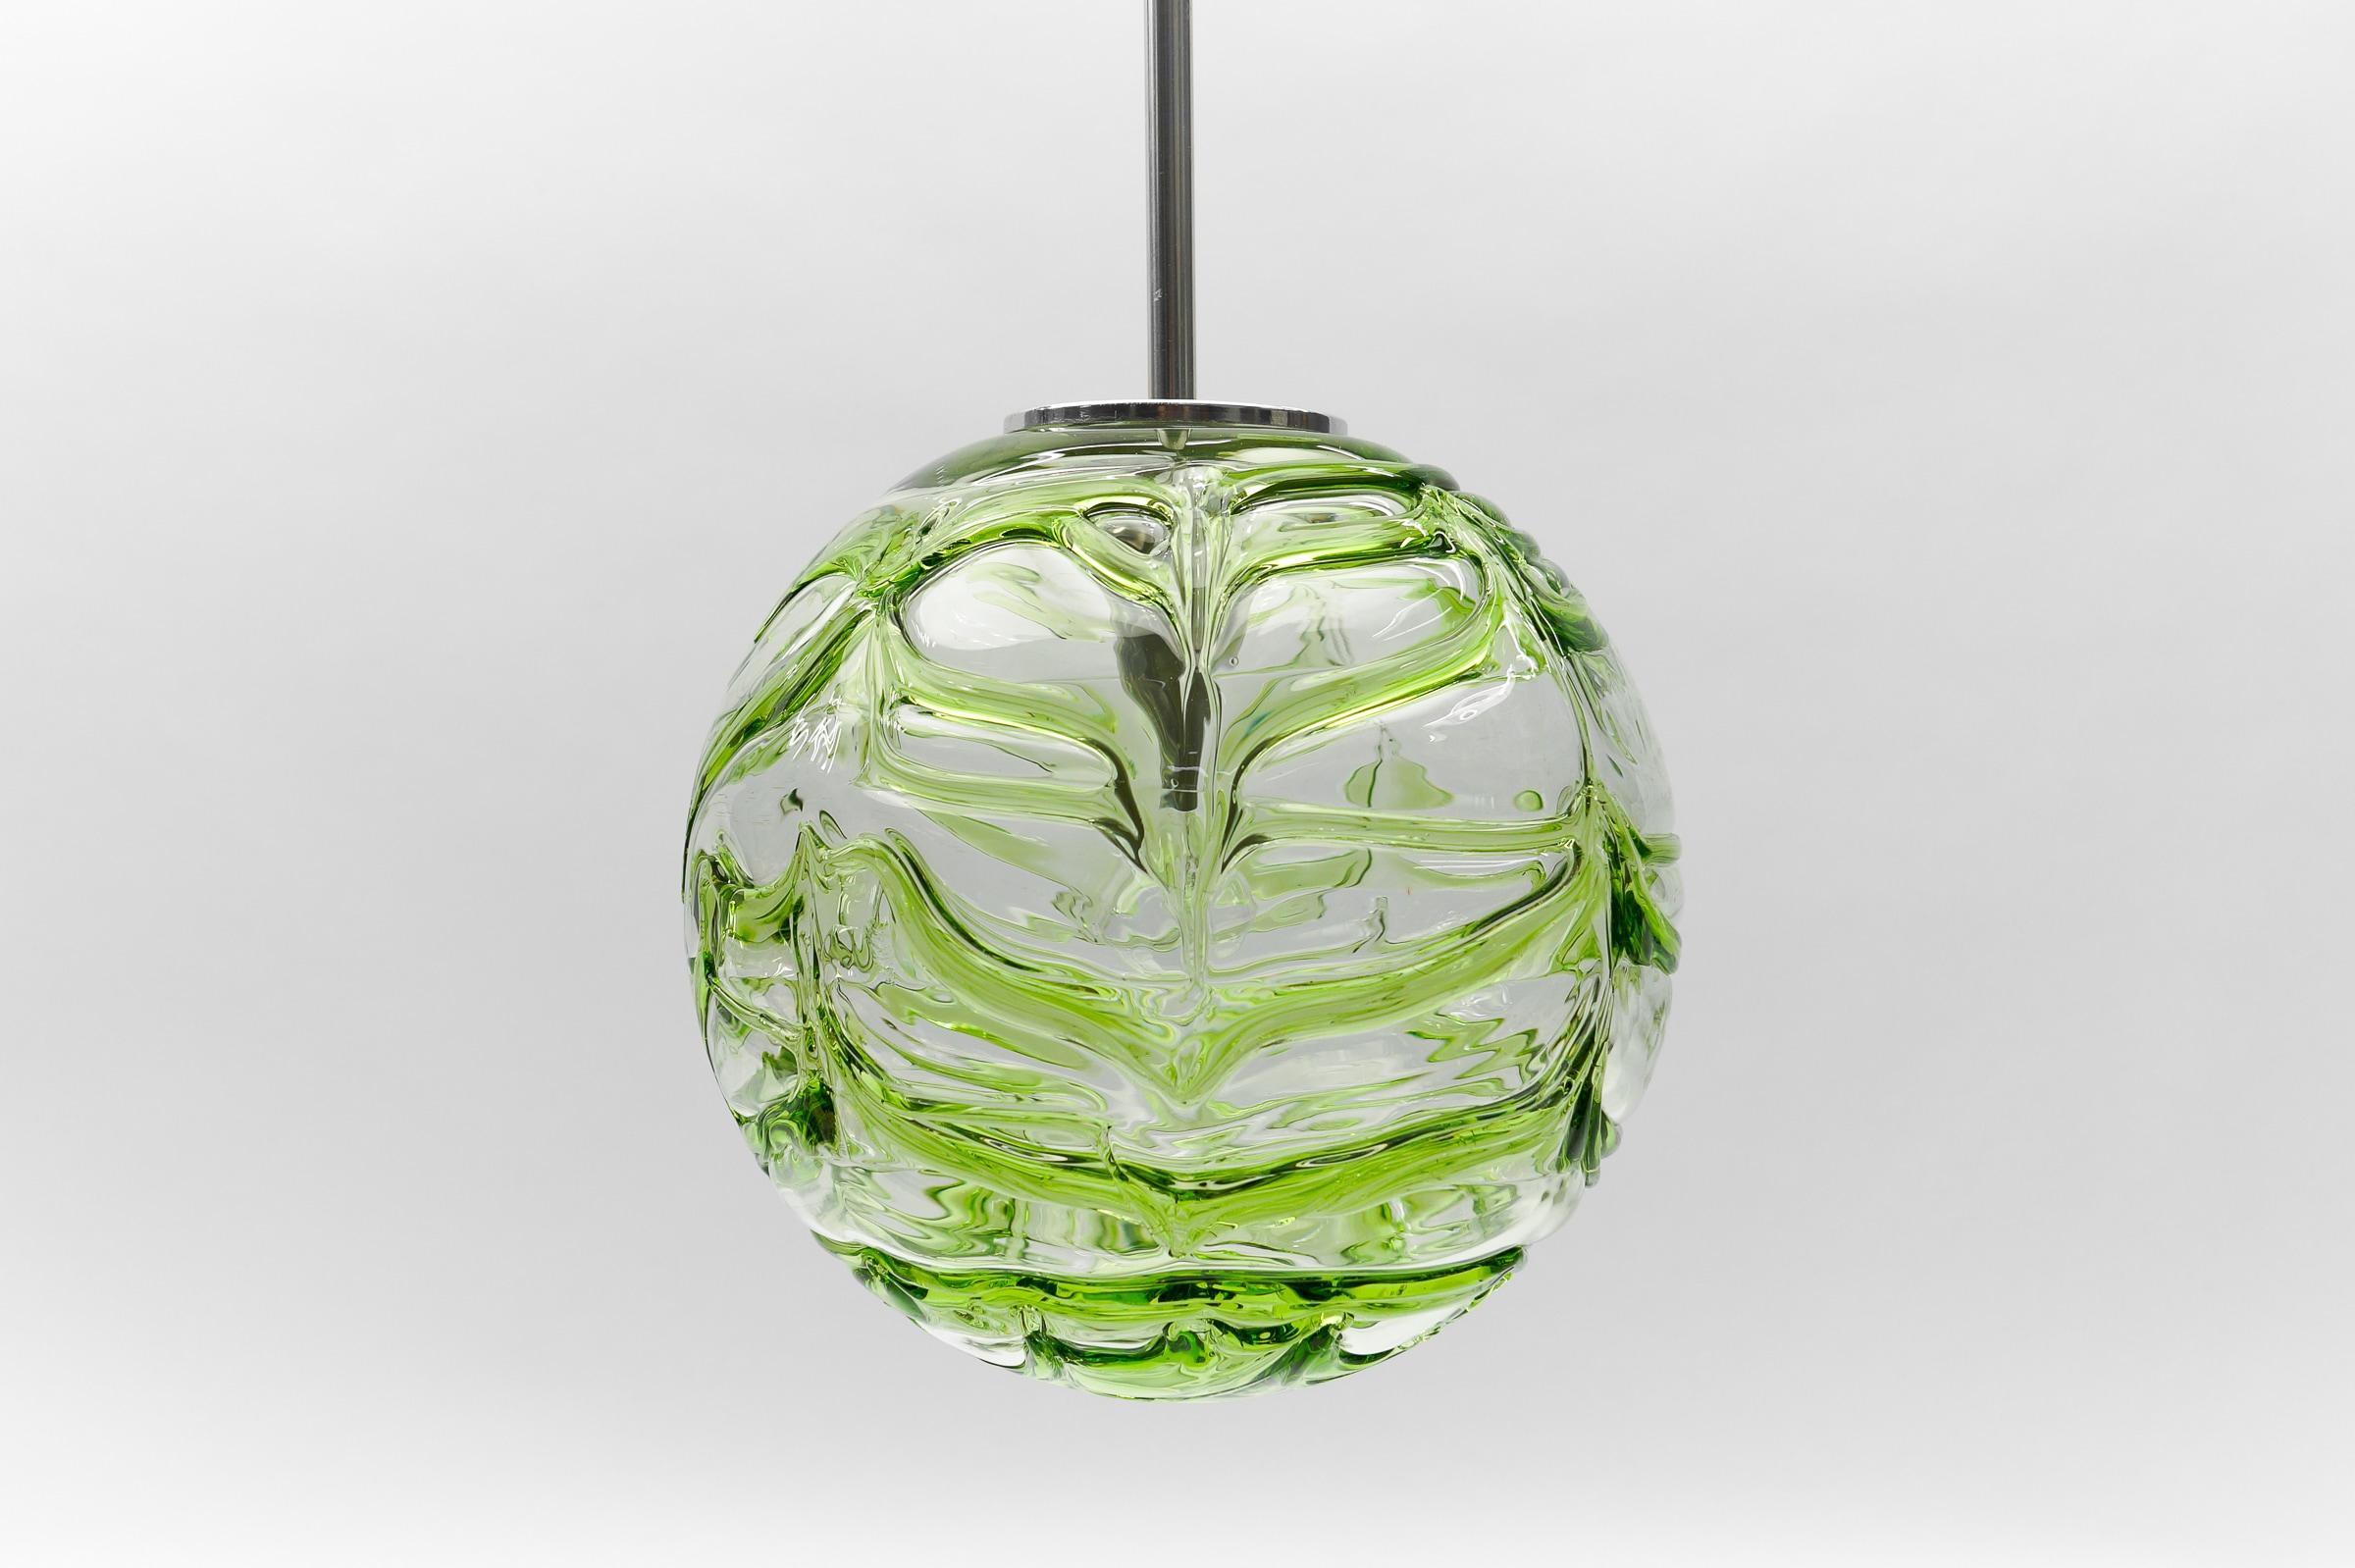 Metal Large Green Murano Glass Ball Pendant Lamp by Doria, - 1960s Germany For Sale